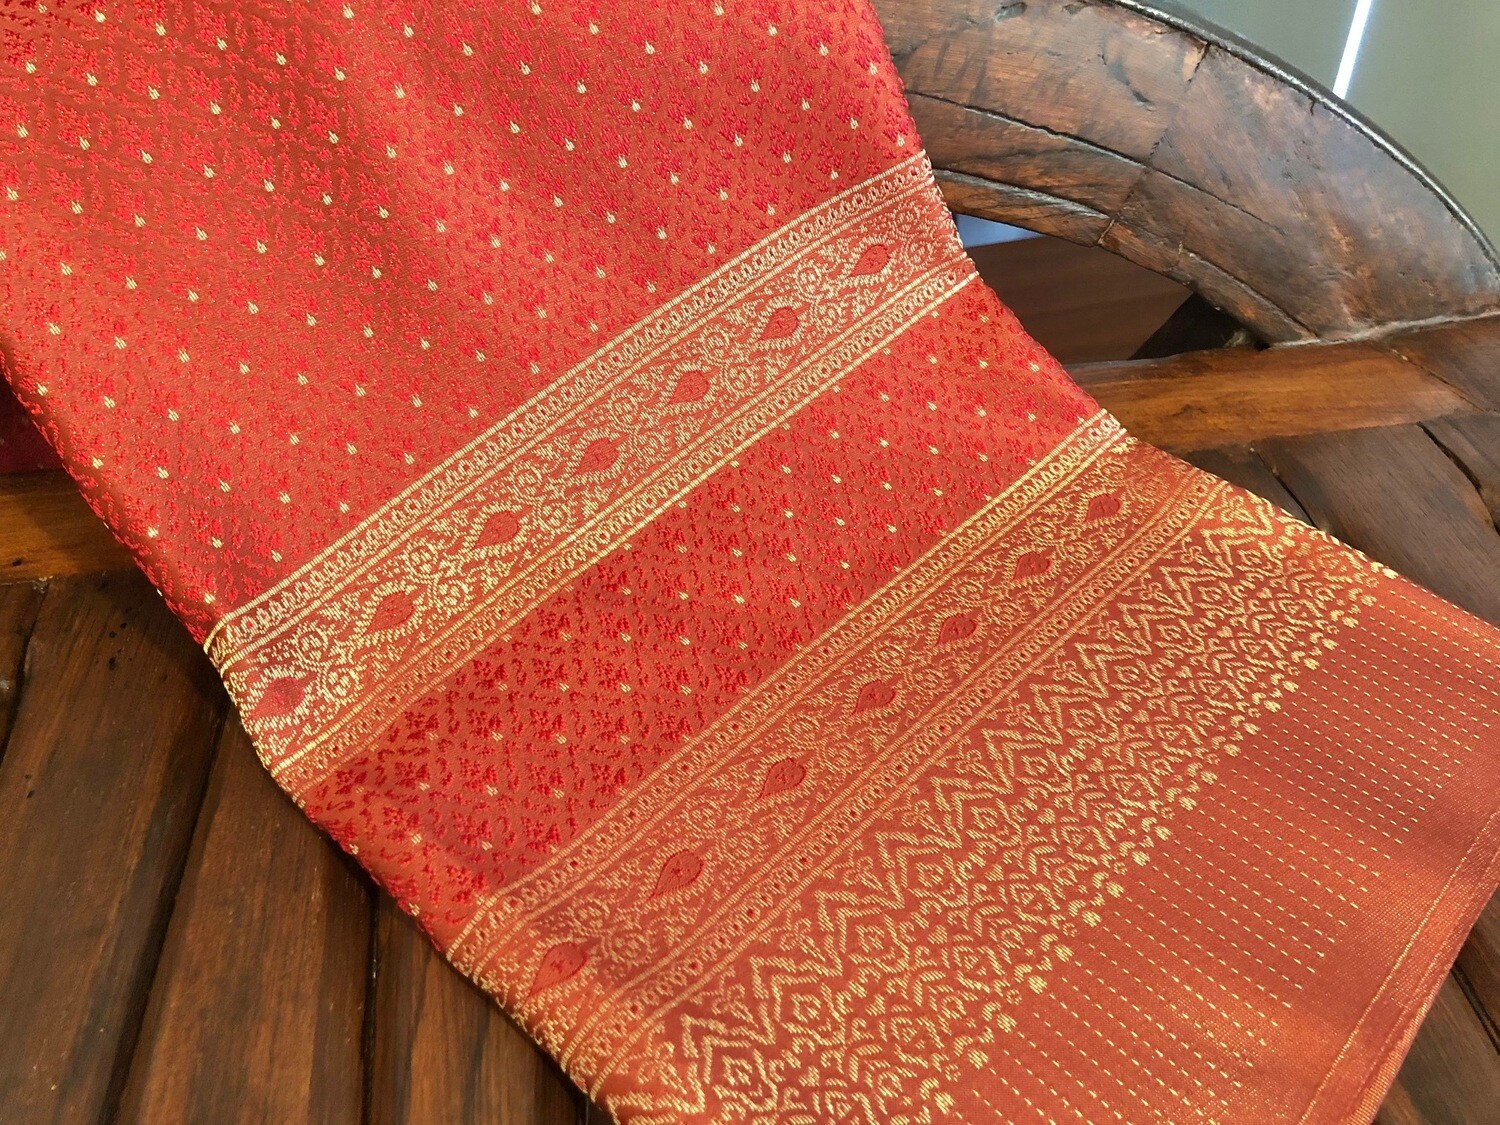 Thai Traditional woven Textile/Fabric - Red